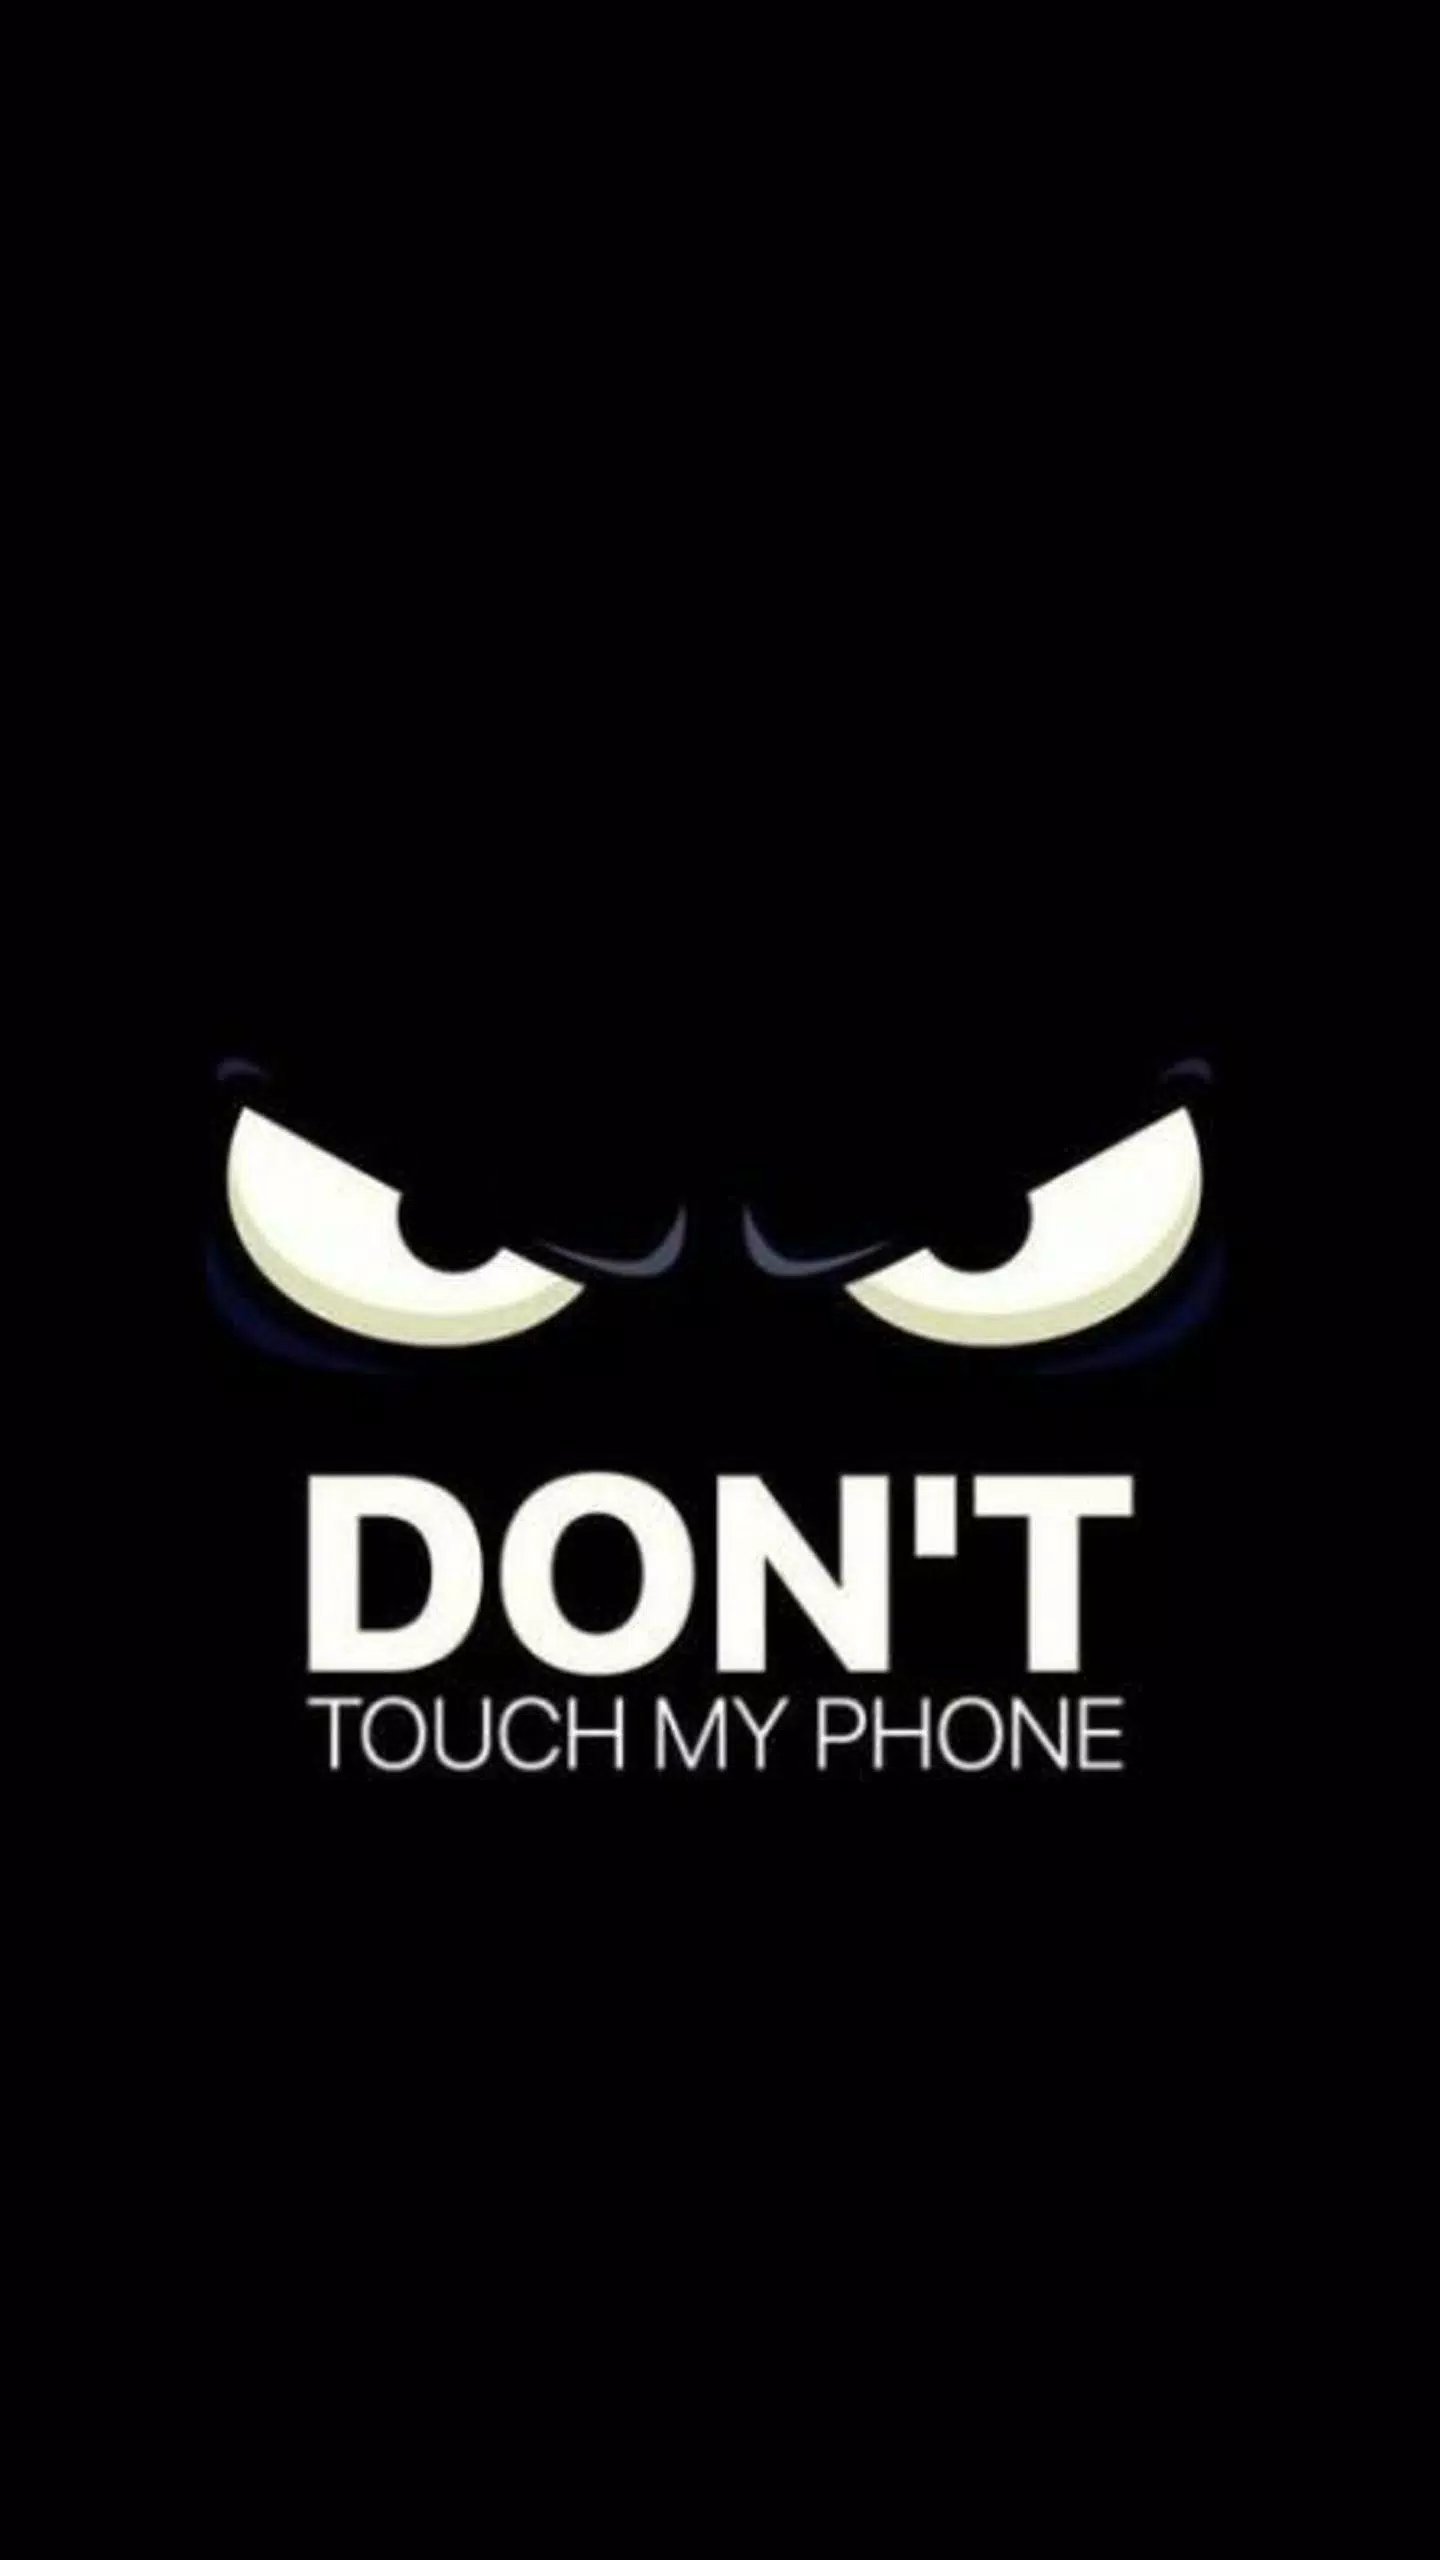 Funny Lock Screen Wallpapers Apk For Android Download